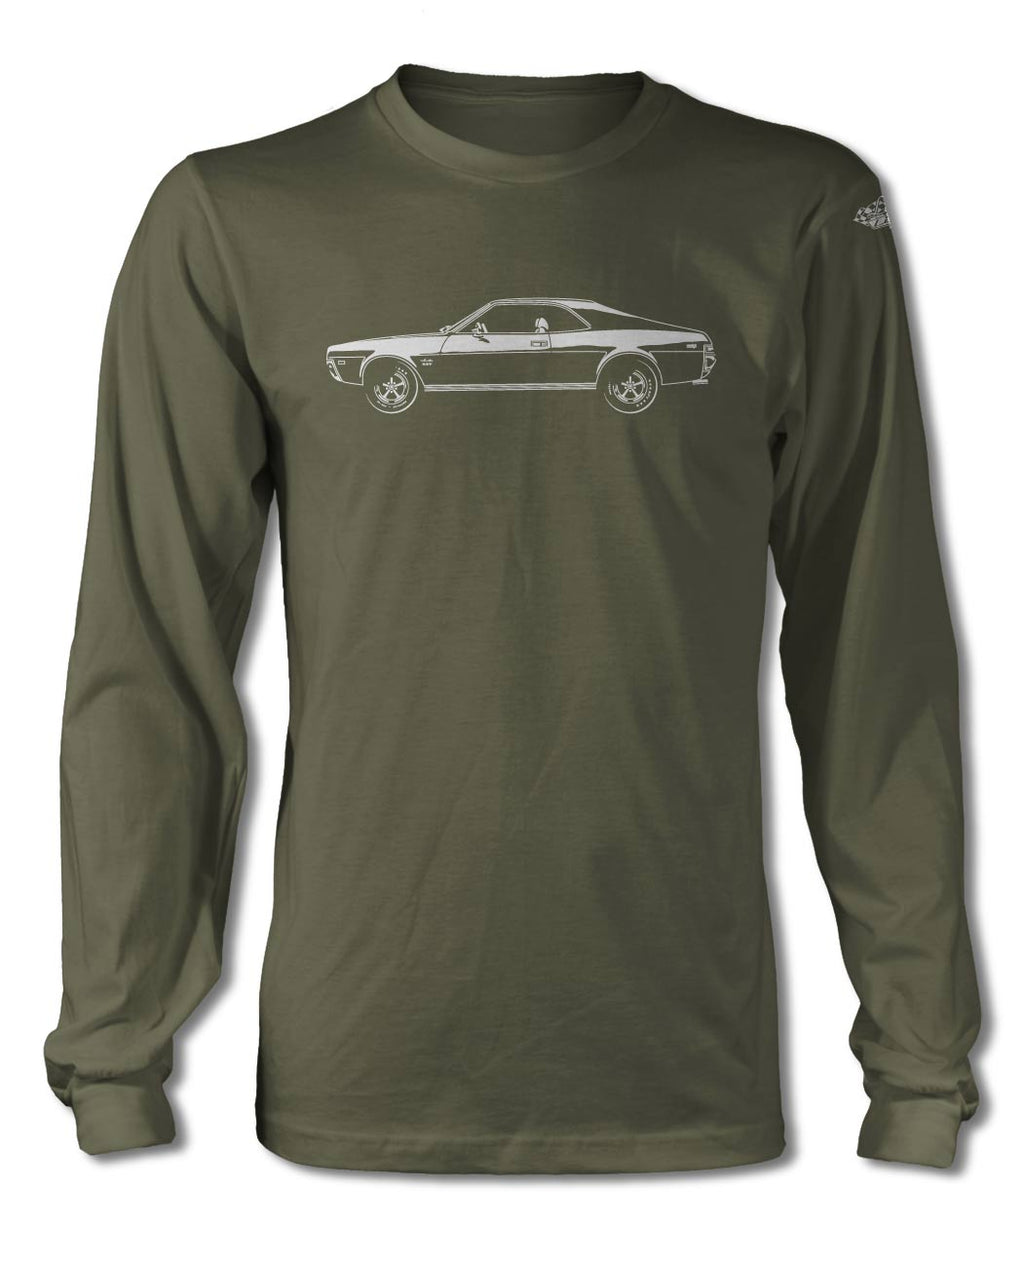 1968 AMC Javelin Coupe T-Shirt - Long Sleeves - Side View